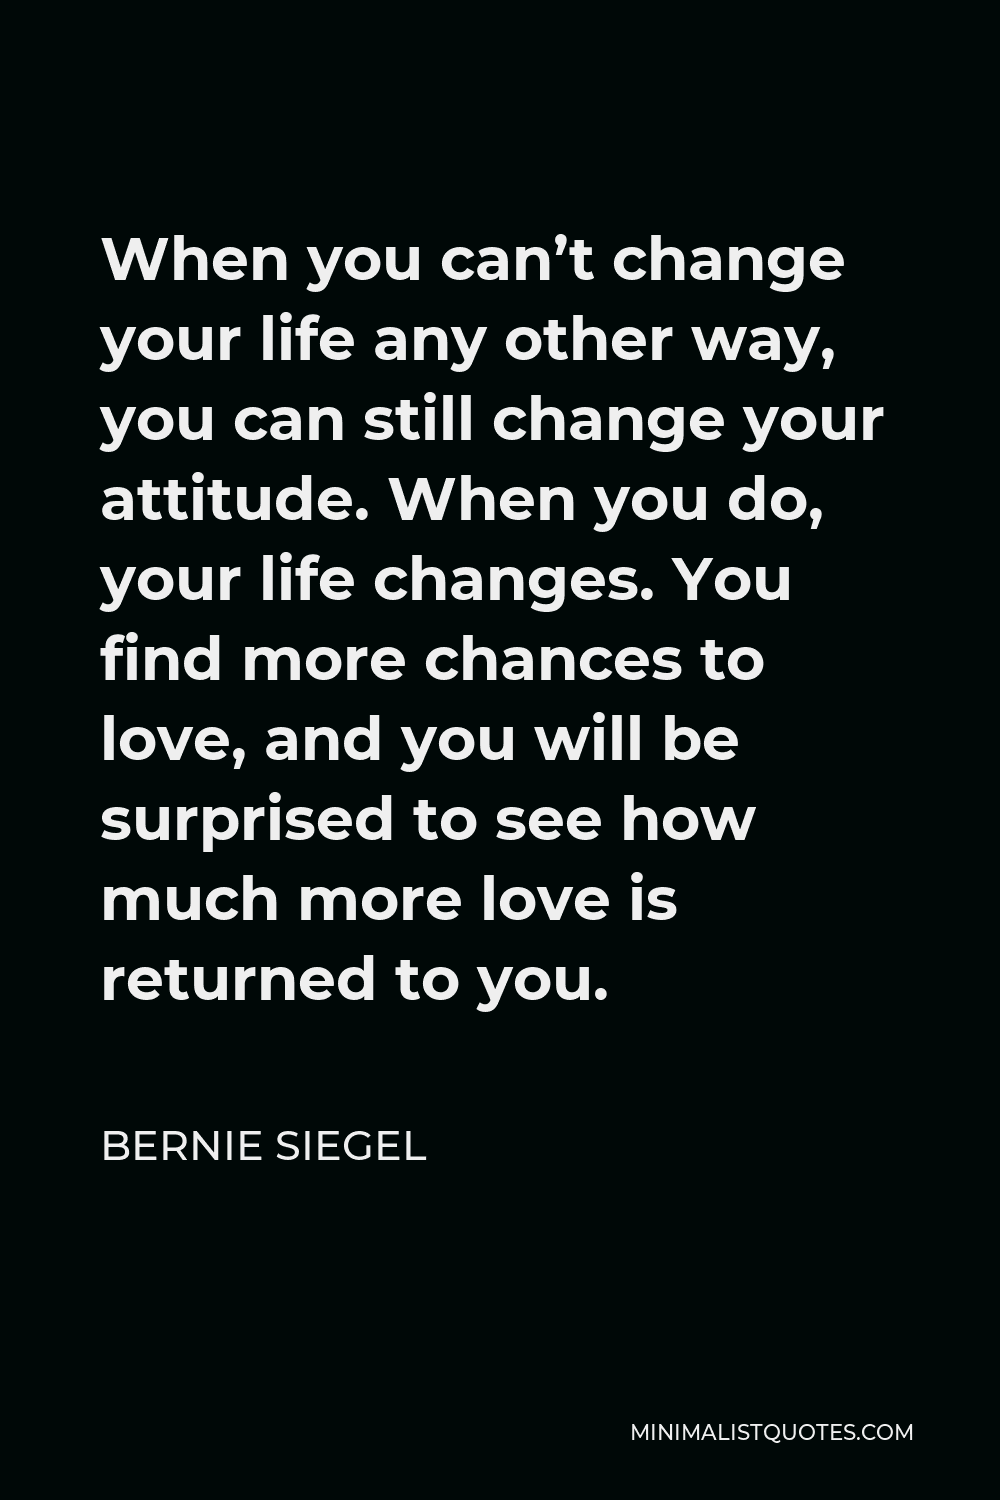 Bernie Siegel Quote - When you can’t change your life any other way, you can still change your attitude. When you do, your life changes. You find more chances to love, and you will be surprised to see how much more love is returned to you.